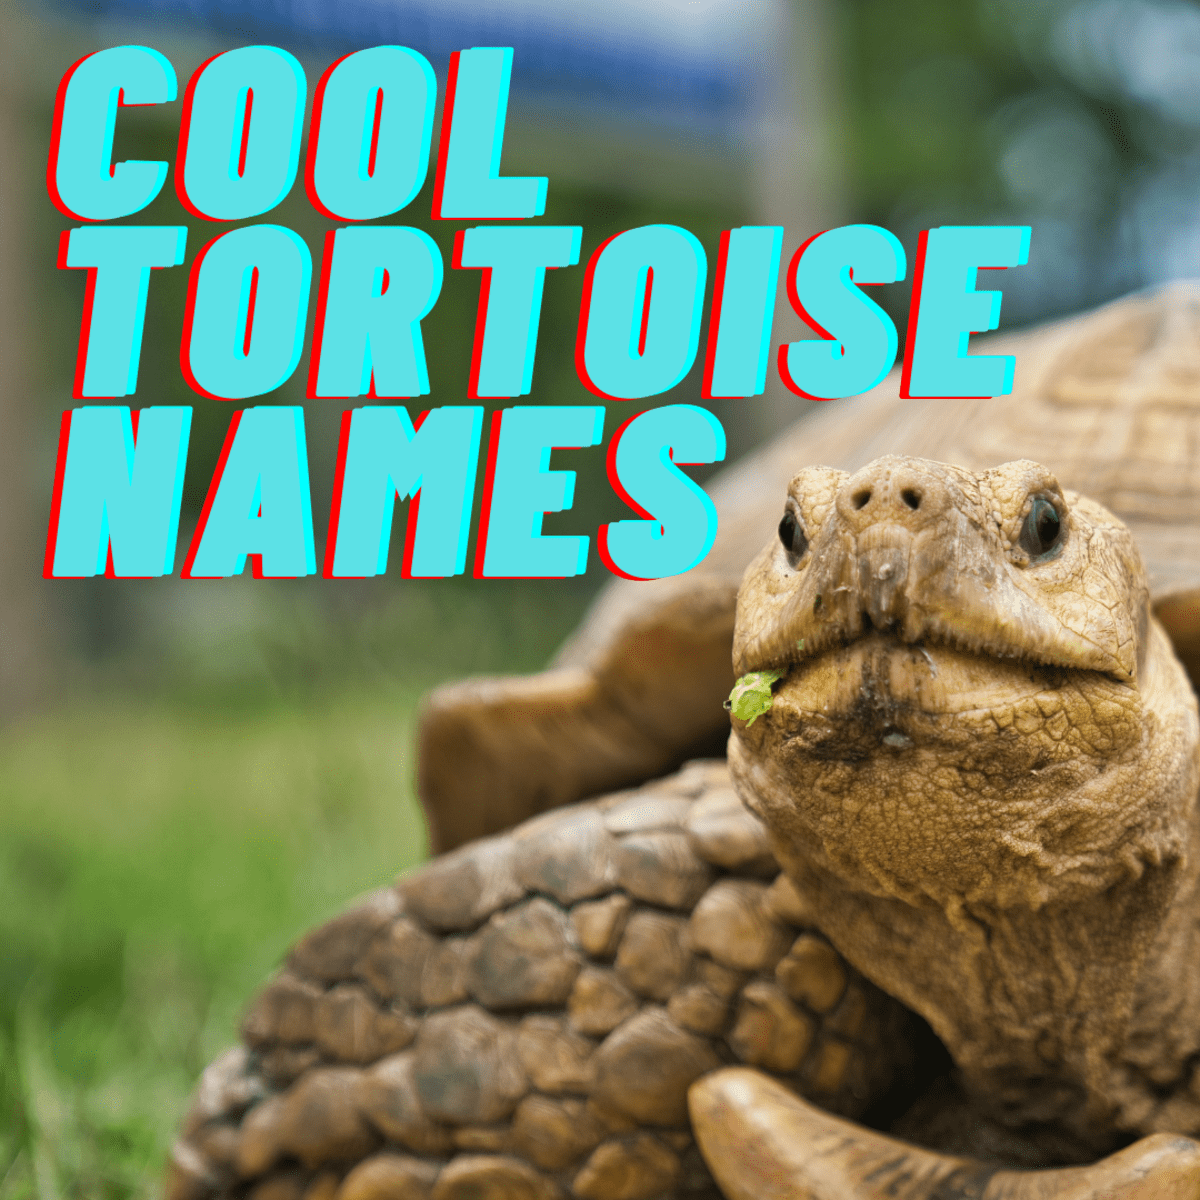 100+ Funny and Cute Tortoise Names - PetHelpful